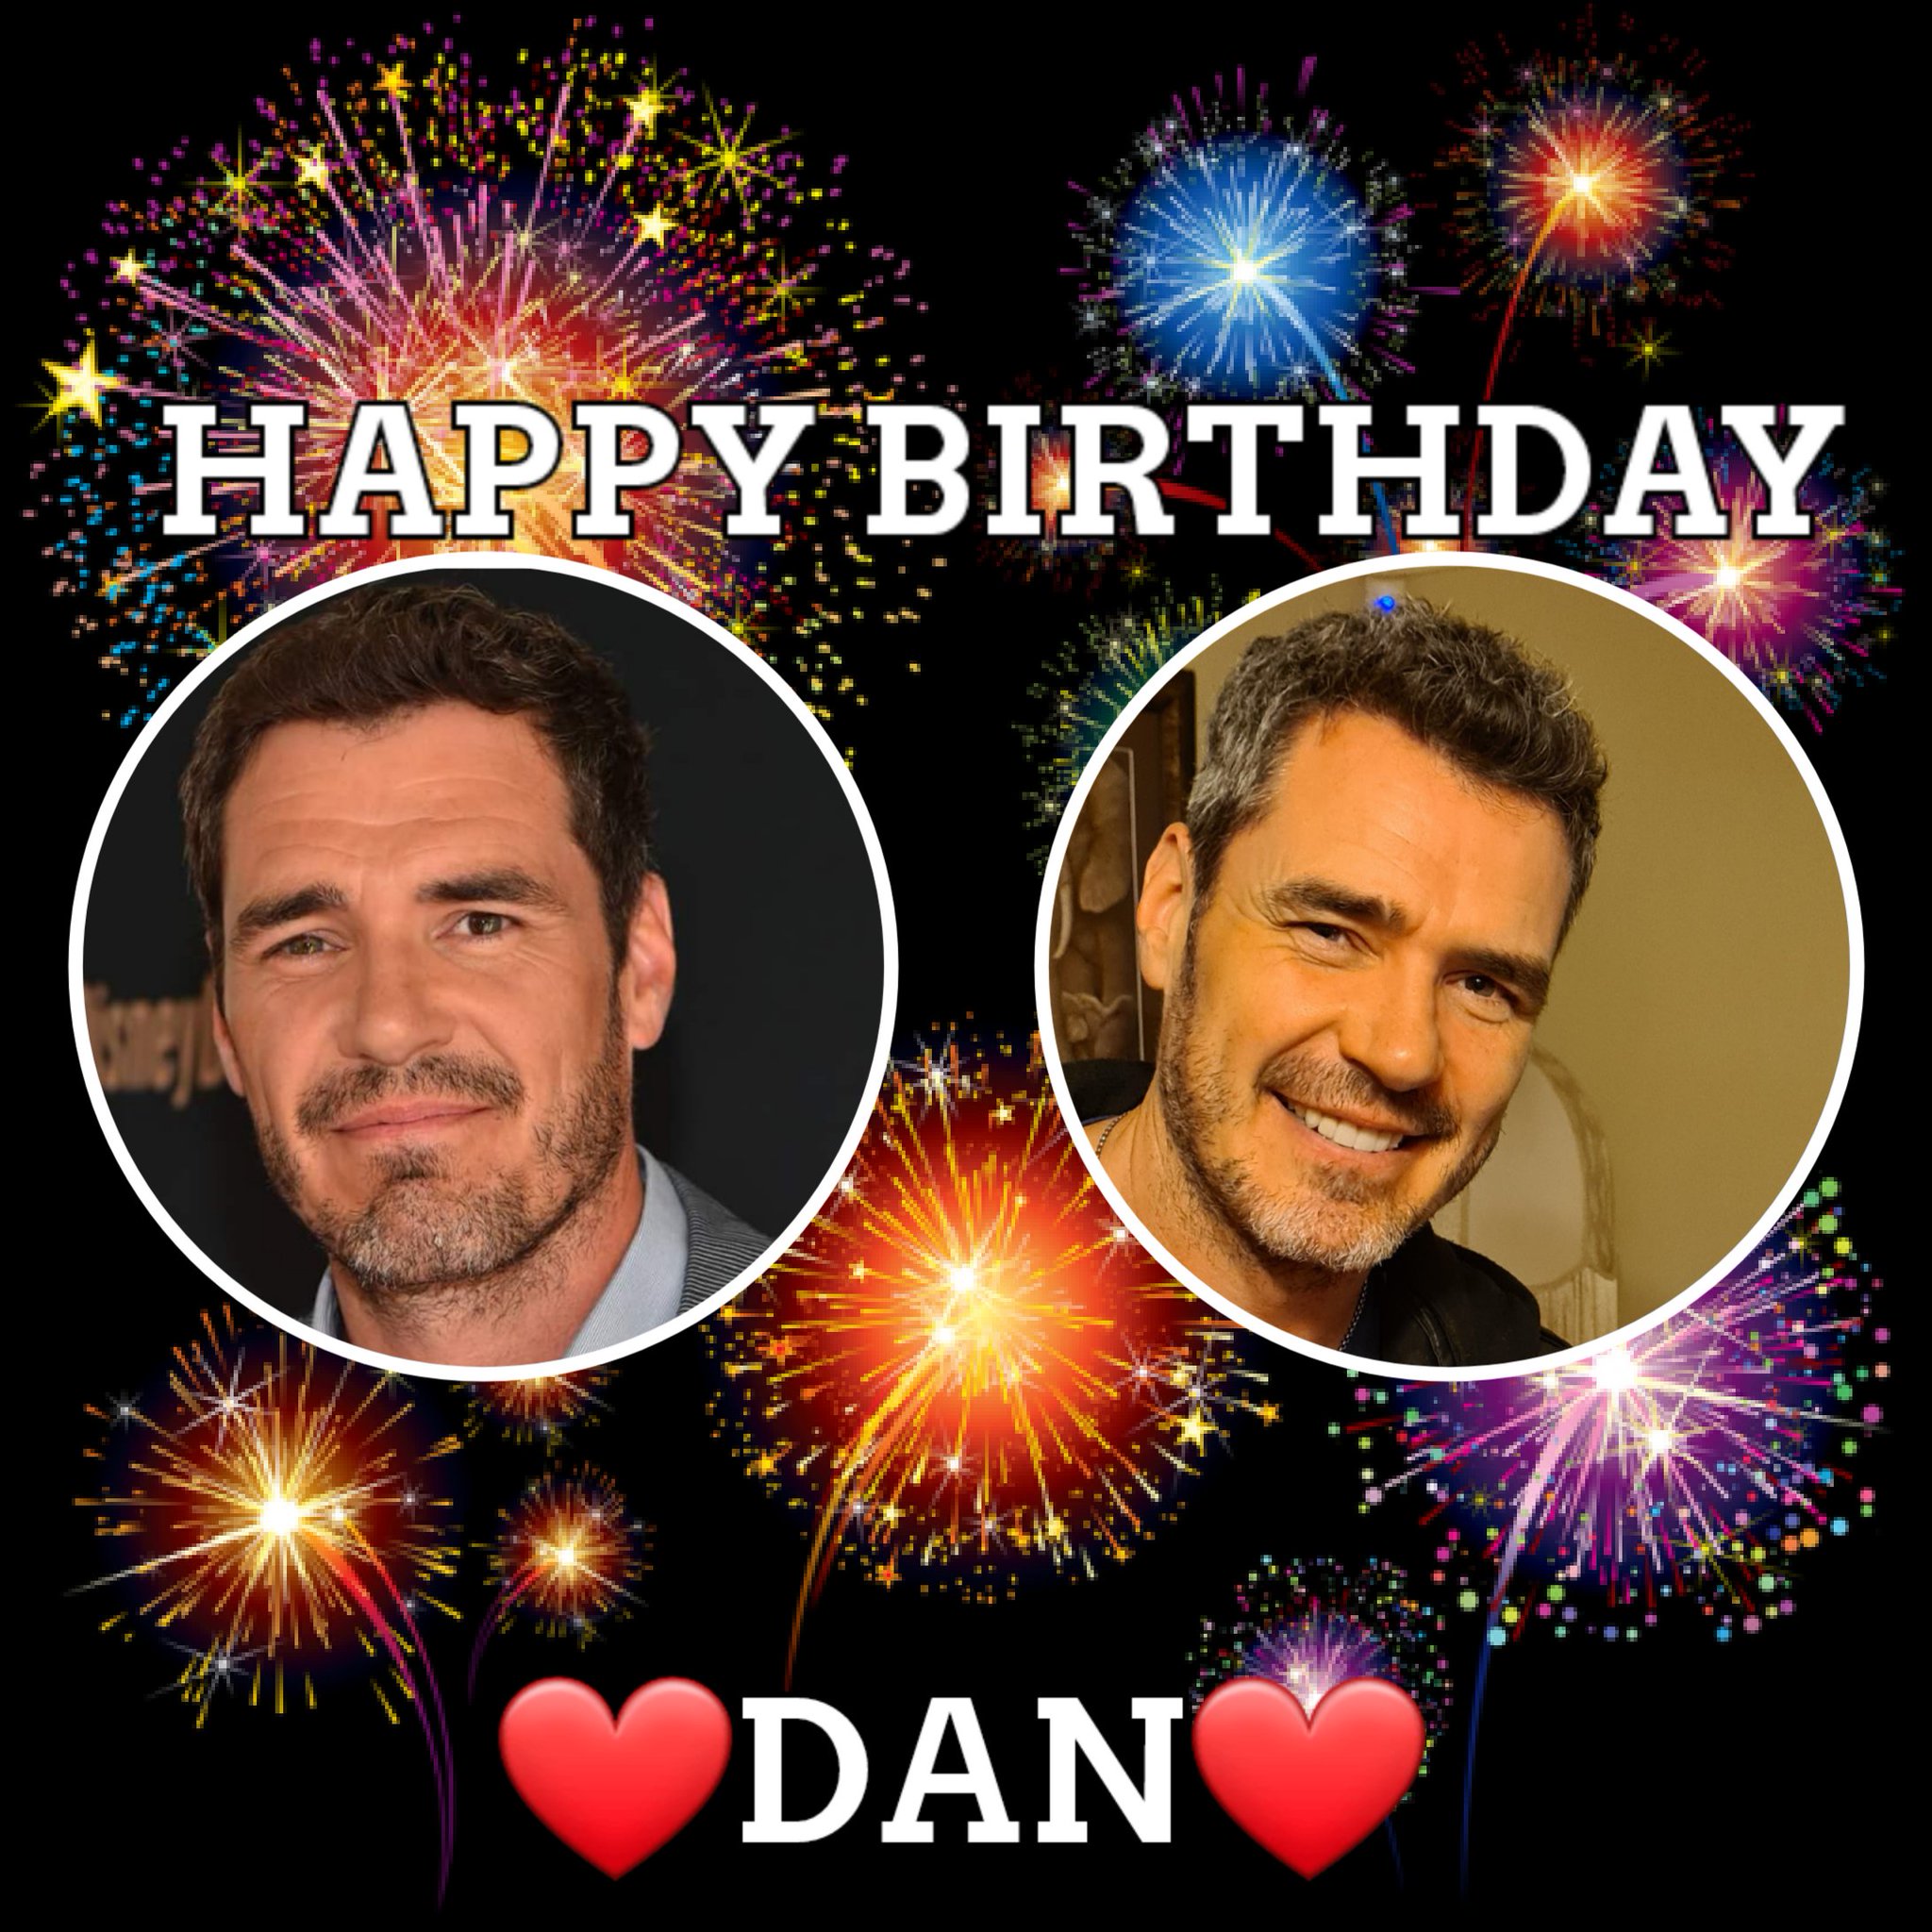 BIG HAPPY BIRTHDAY TO DAN PAYNE HOPE YOU HAVE AN AMAZING DAY      